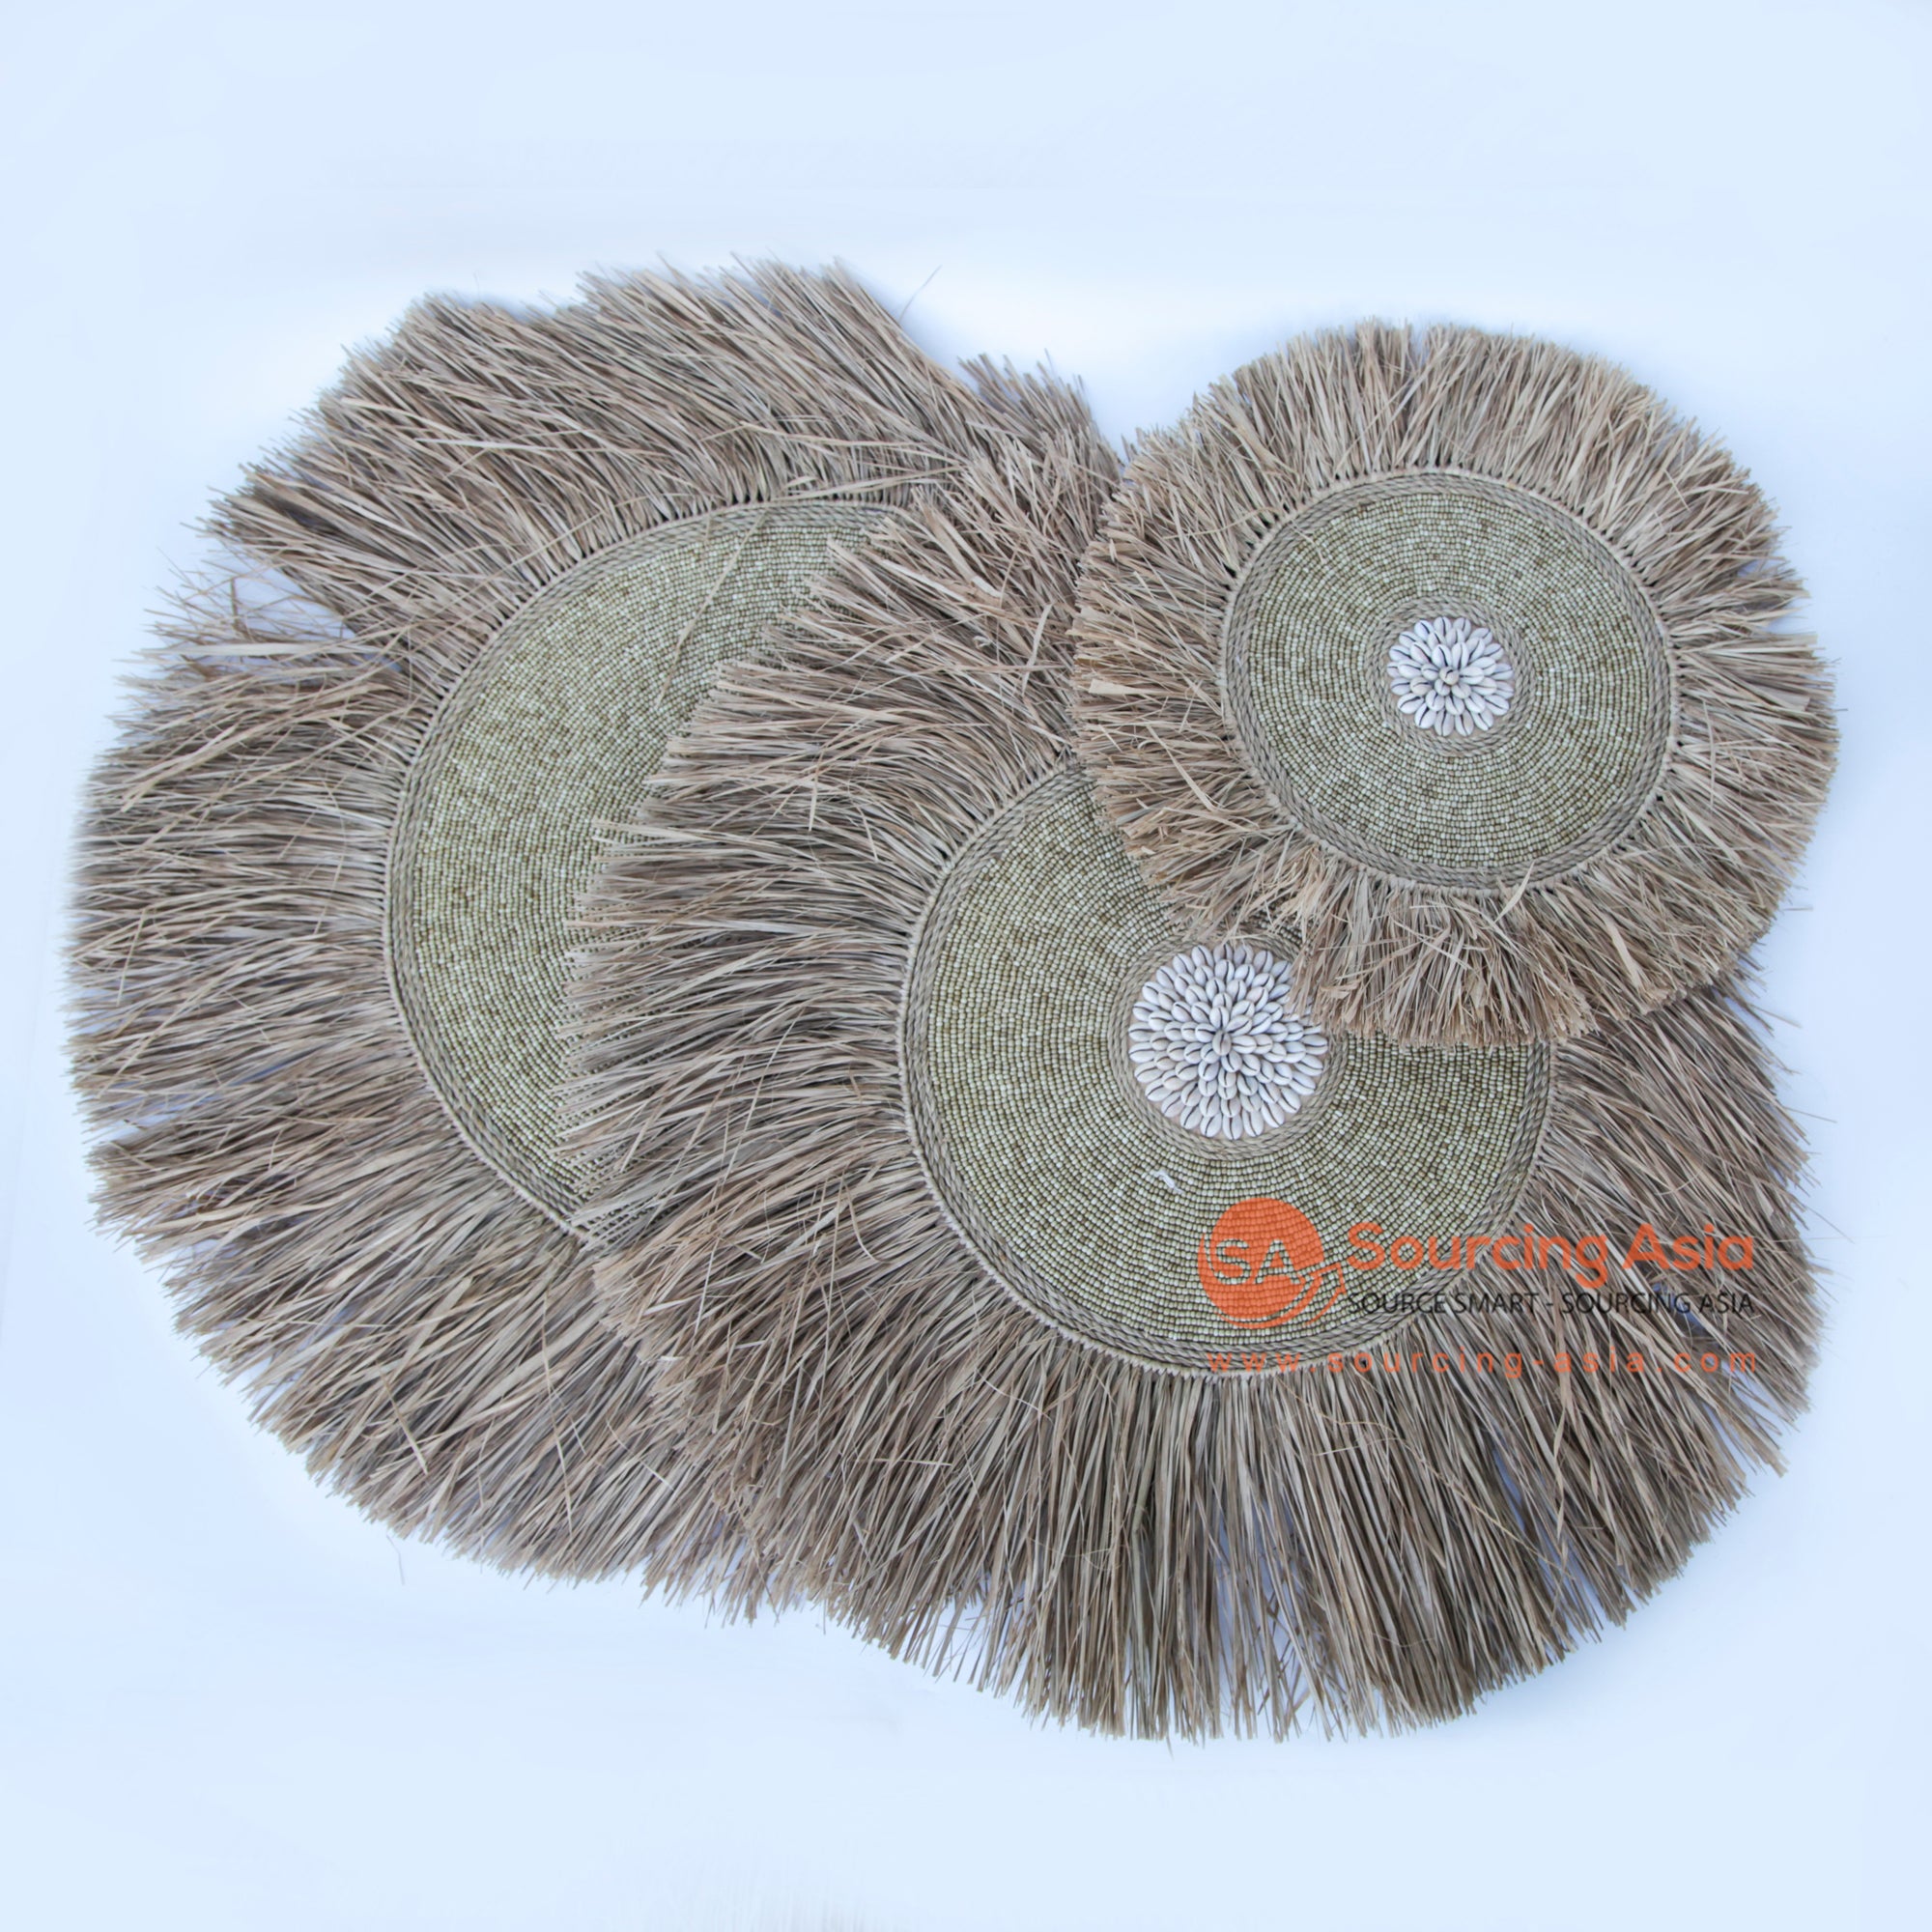 DHL052 SET OF THREE NATURAL RAFFIA, BEADS, AND WHITE SHELL ROUND WALL DECORATIONS